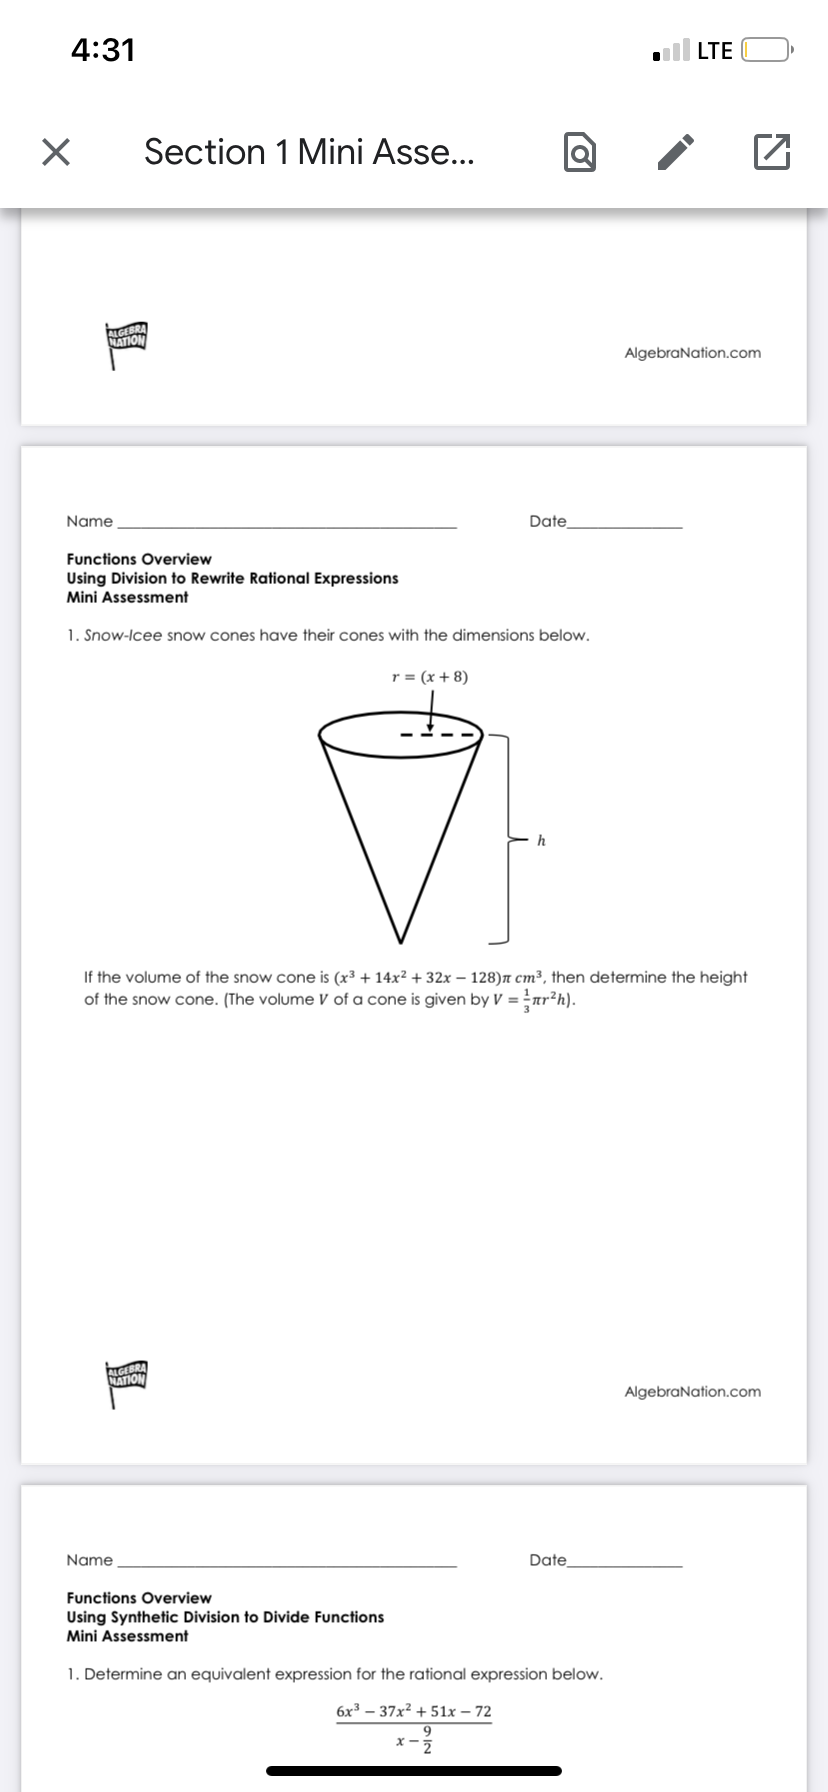 4:31
ll LTE
Section 1 Mini Asse...
ALGEBRA
NATION
AlgebraNation.com
Name
Date
Functions Overview
Using Division to Rewrite Rational Expressions
Mini Assessment
1. Snow-Icee snow cones have their cones with the dimensions below,
r = (x + 8)
h
If the volume of the snow cone is (x³ + 14x² + 32x – 128)n cm³, then determine the height
of the snow cone. (The volume V of a cone is given by V = nr?h).
ALGEBRA
NATION
AlgebraNation.com
Name
Date
Functions Overview
Using Synthetic Division to Divide Functions
Mini Assessment
1. Determine an equivalent expression for the rational expression below.
6x3 – 37x² + 51x – 72
